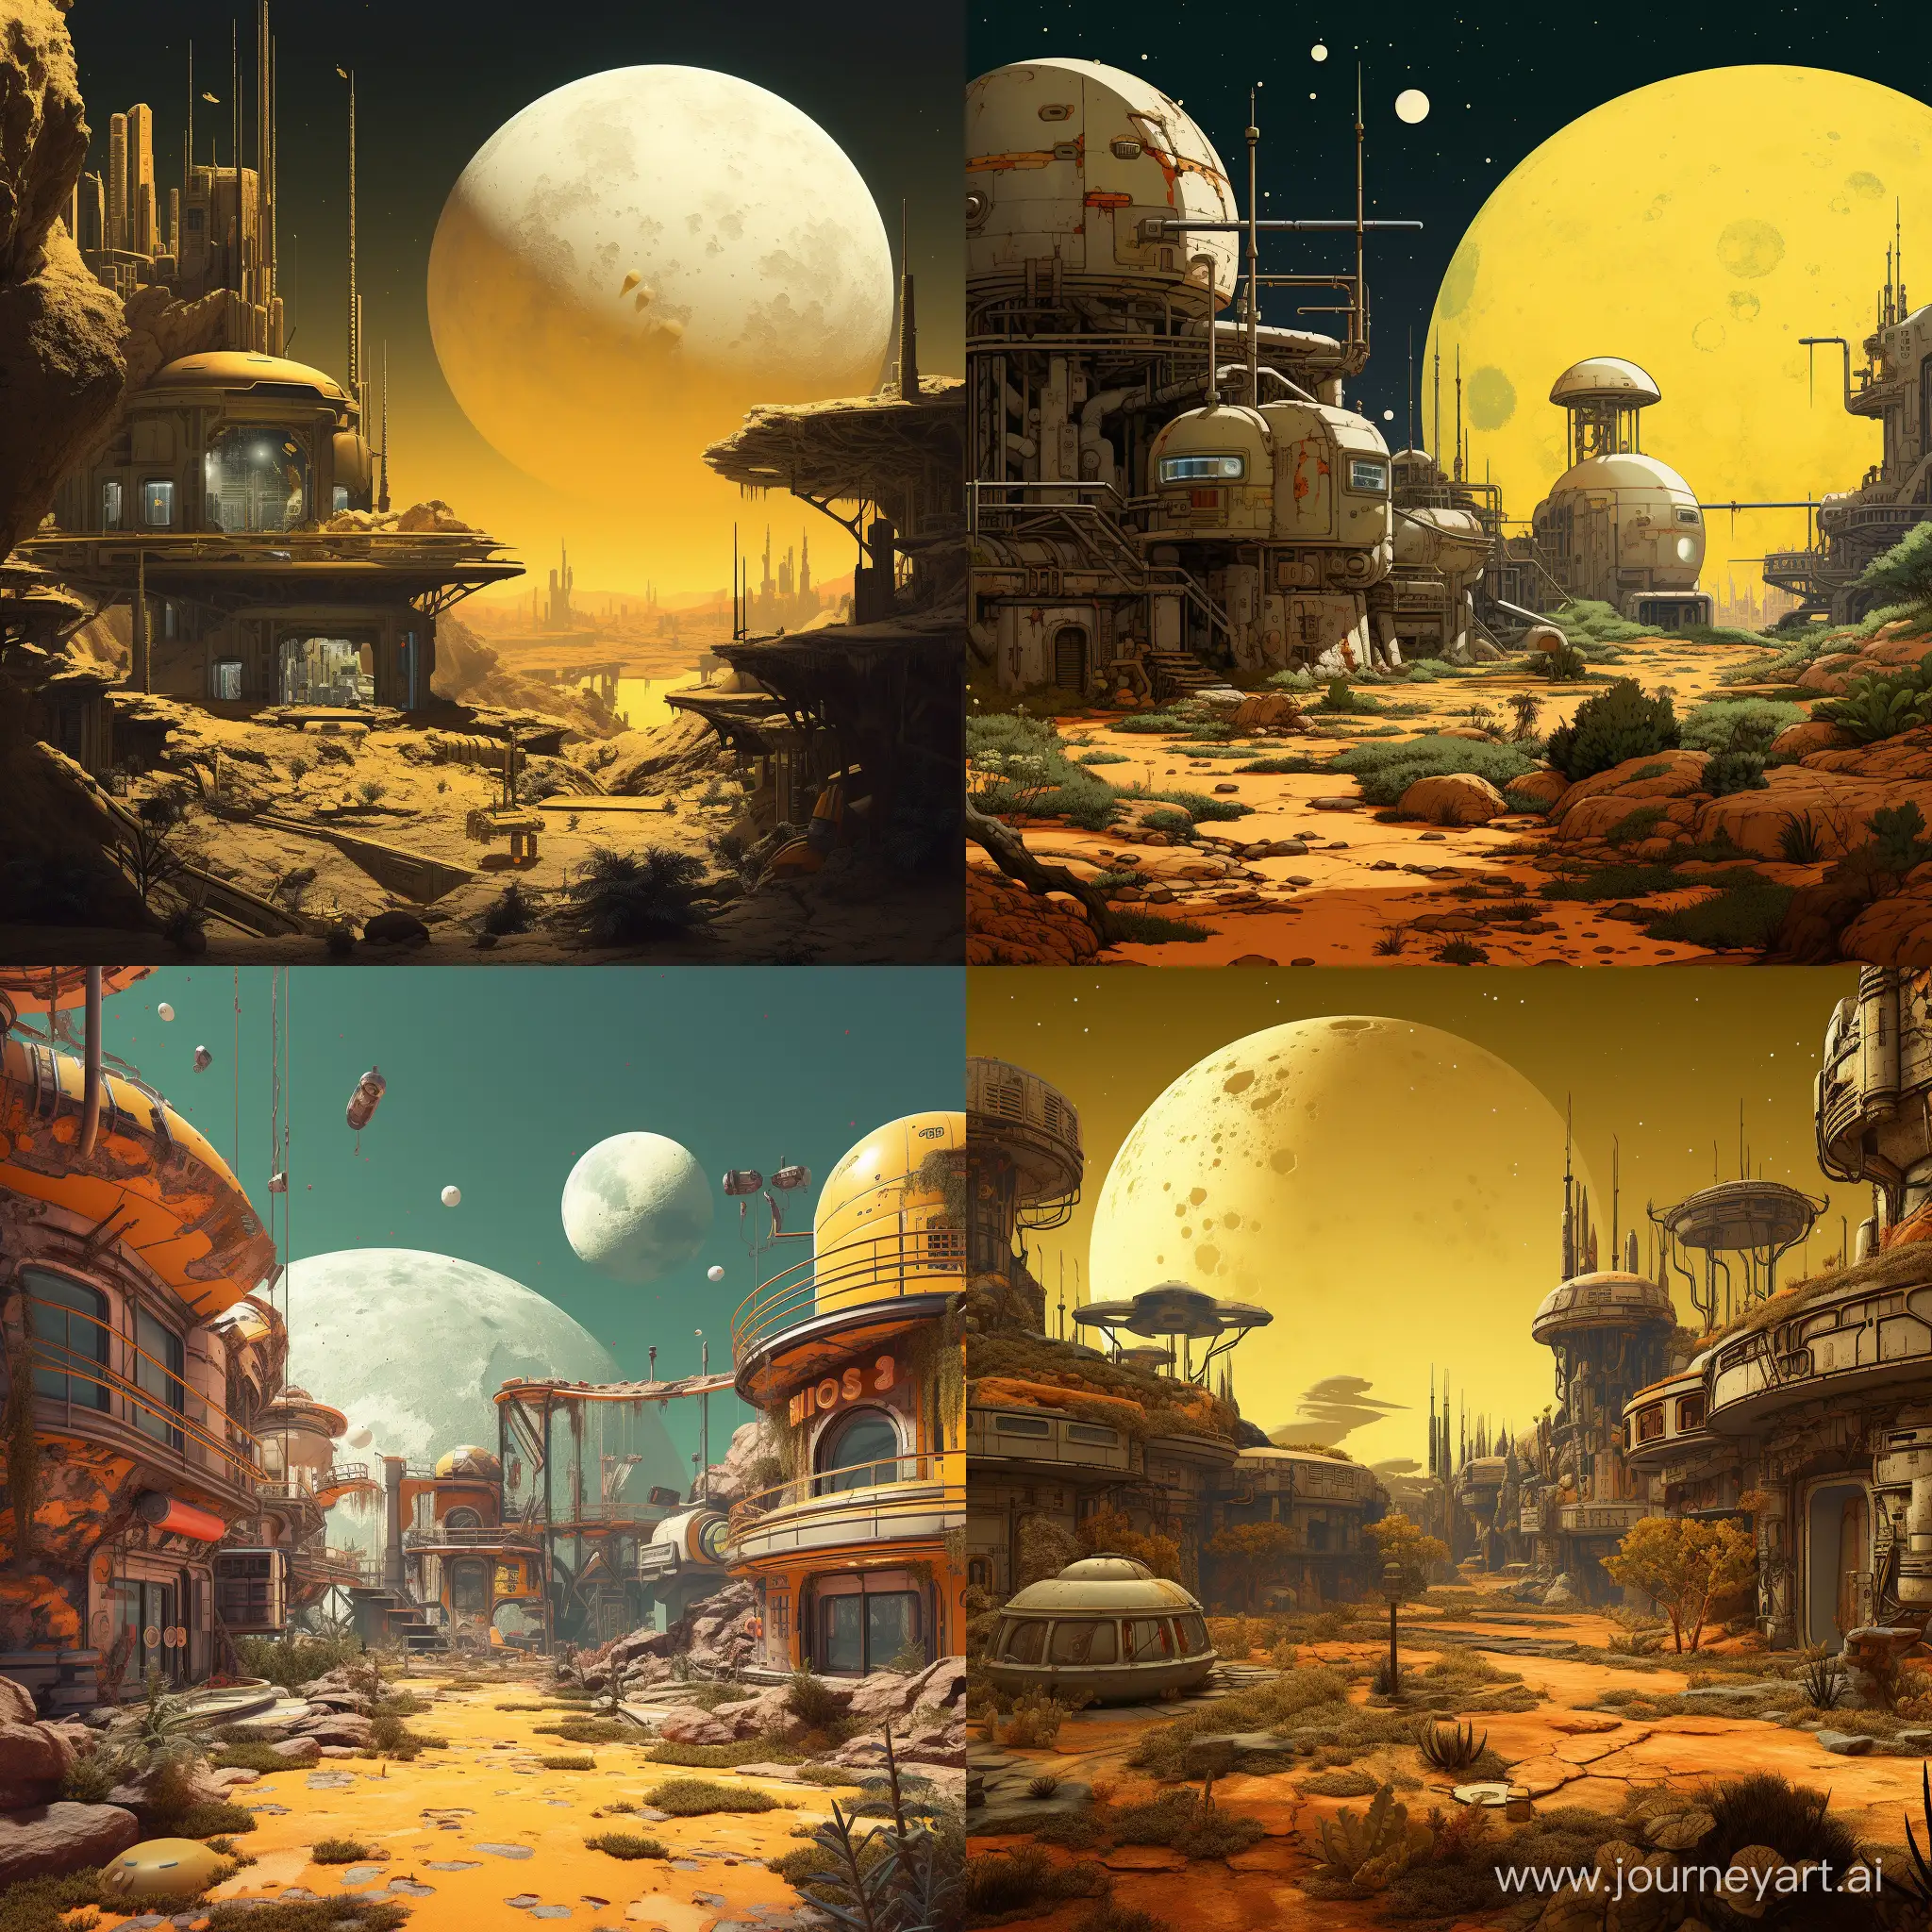 Scenery. A small yellow moon with a small space outpost on it. There are spaceships on the landing pads, and to the left you can see an old-fashioned building in the retro futurist style. Множество тёмных растений вокруг окутывают старые здания и брошенные корабли. Жёлтый грунт.